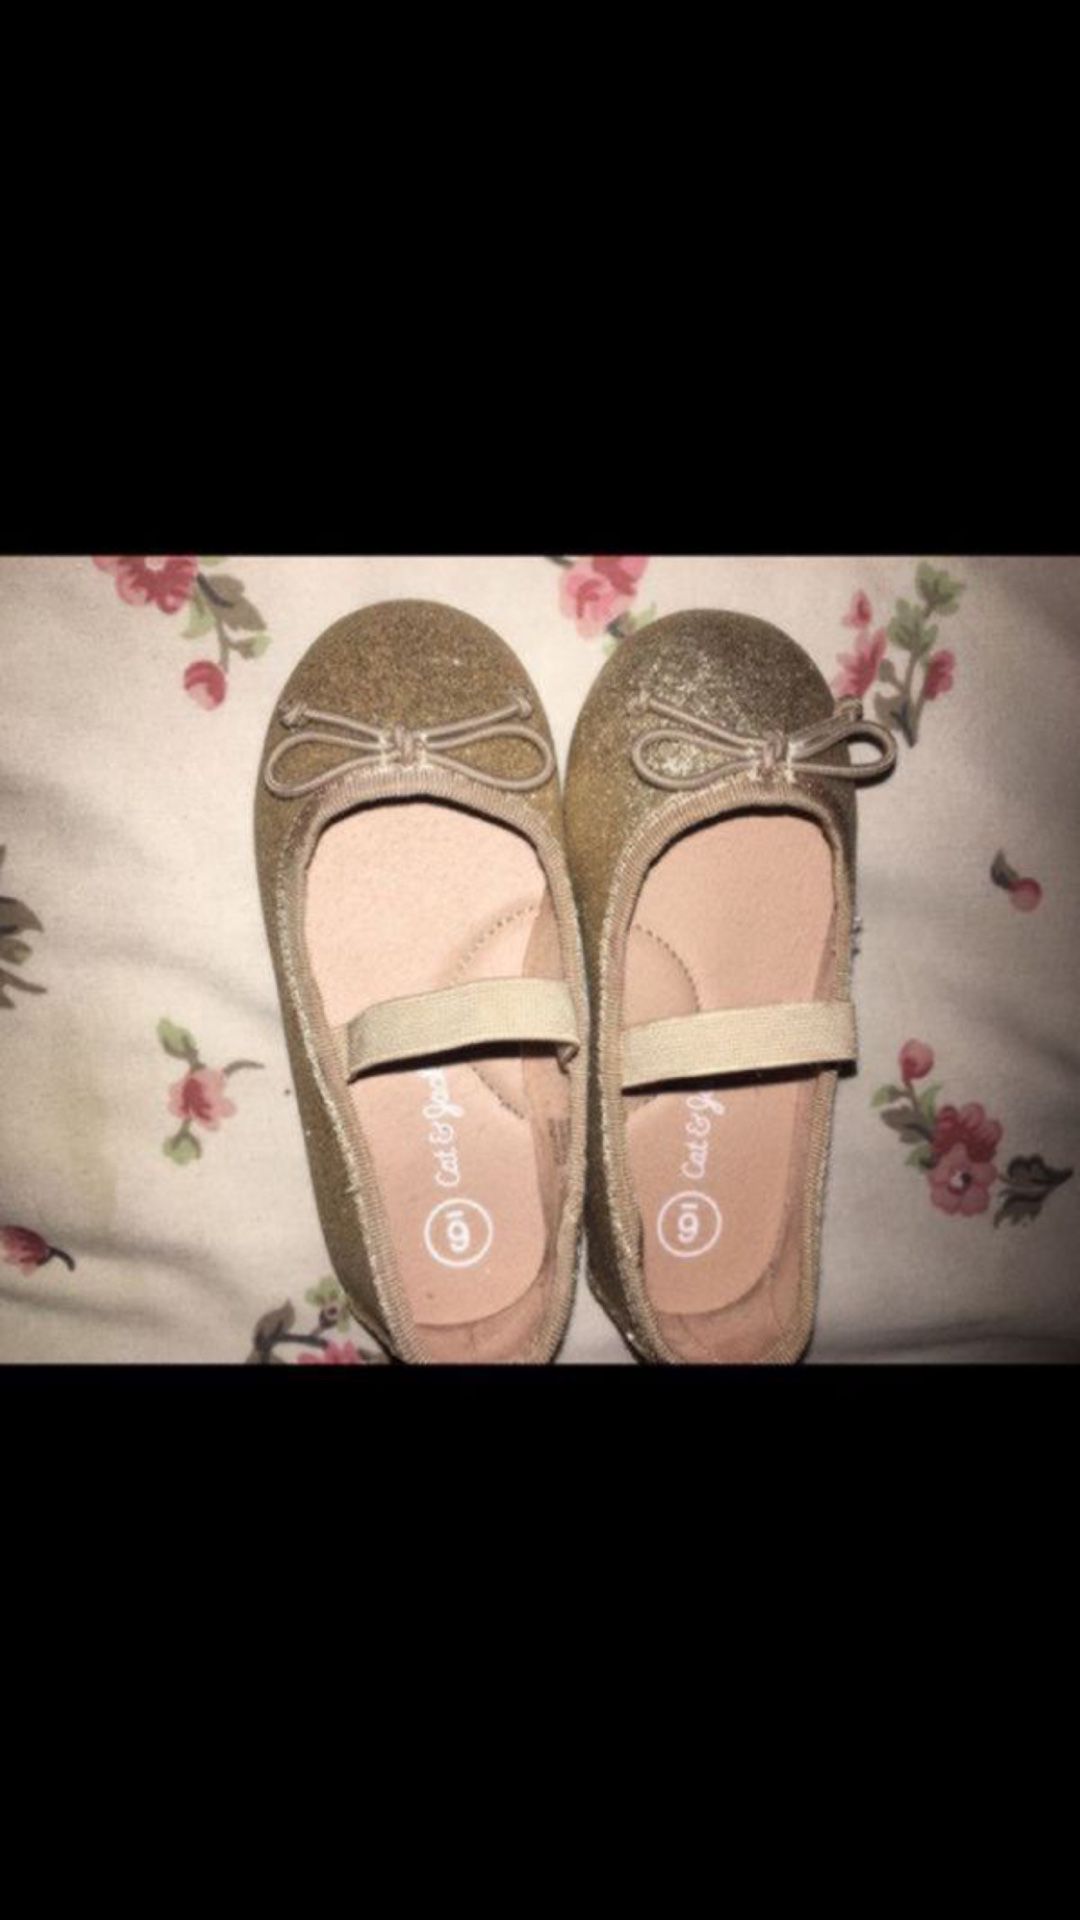 Toddler gold dressy shoes worn once size 6c